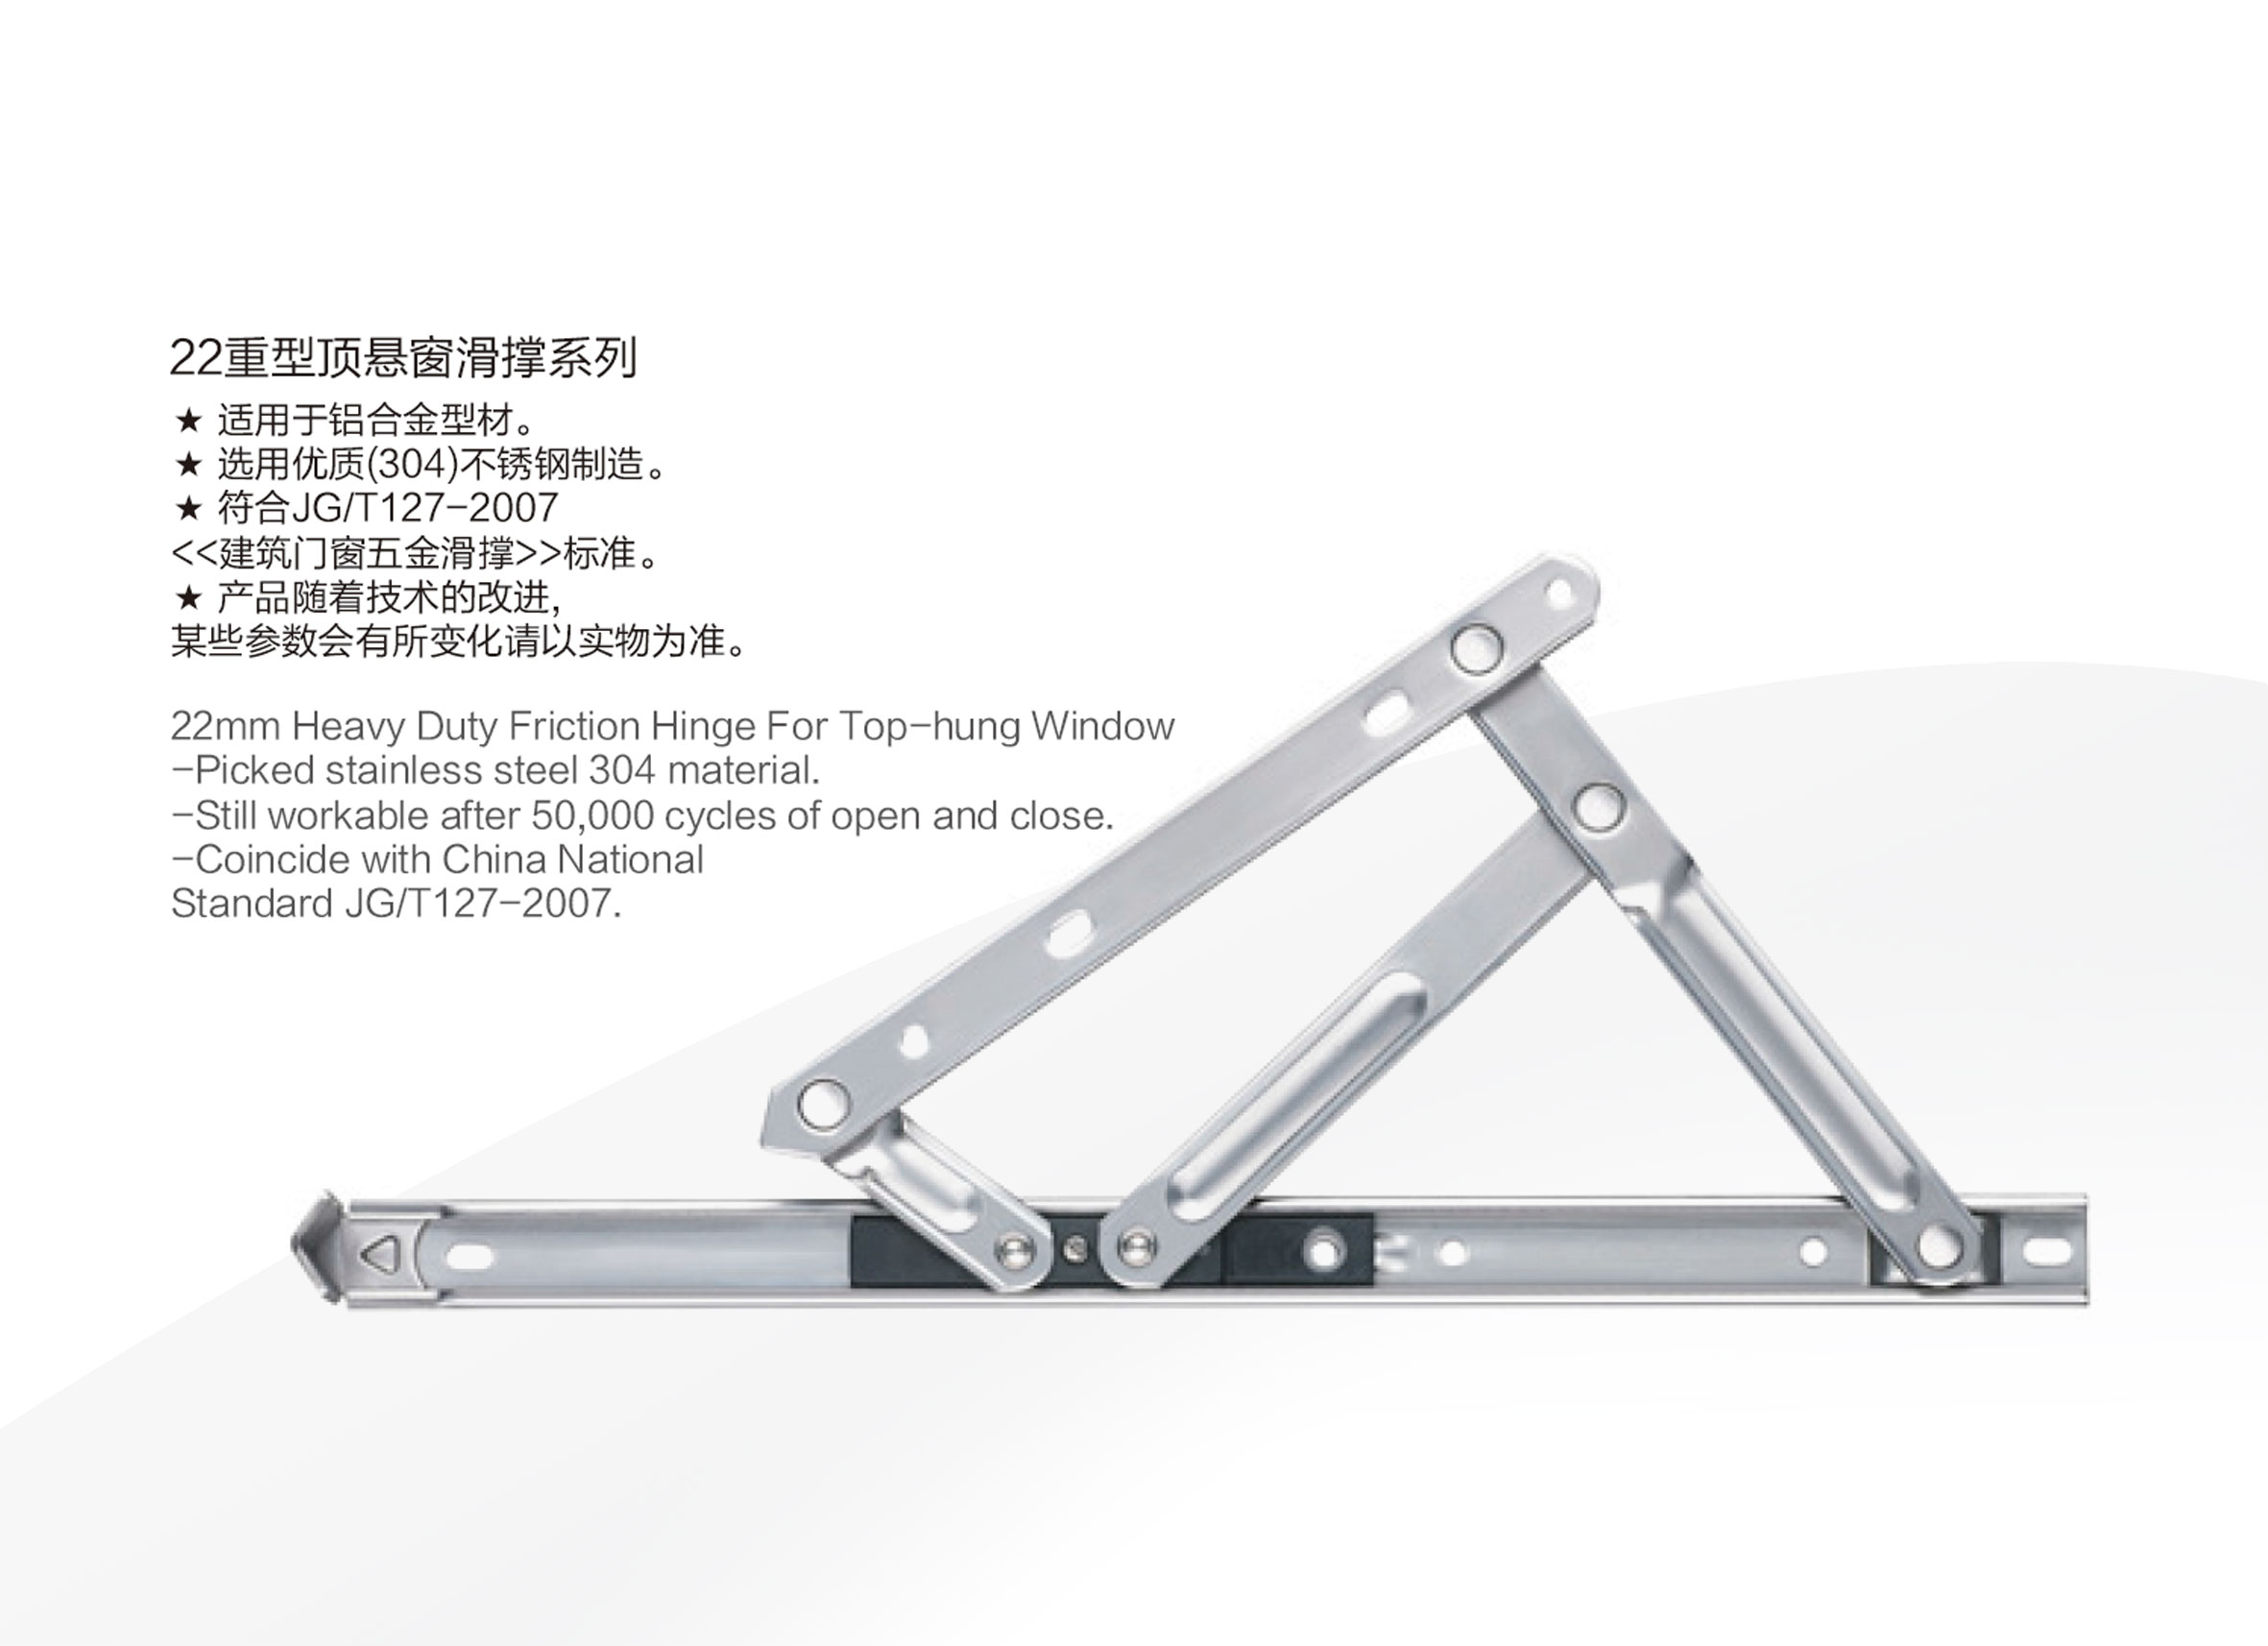 22mm Heavy Duty Friction Hinge For Top-hung Window